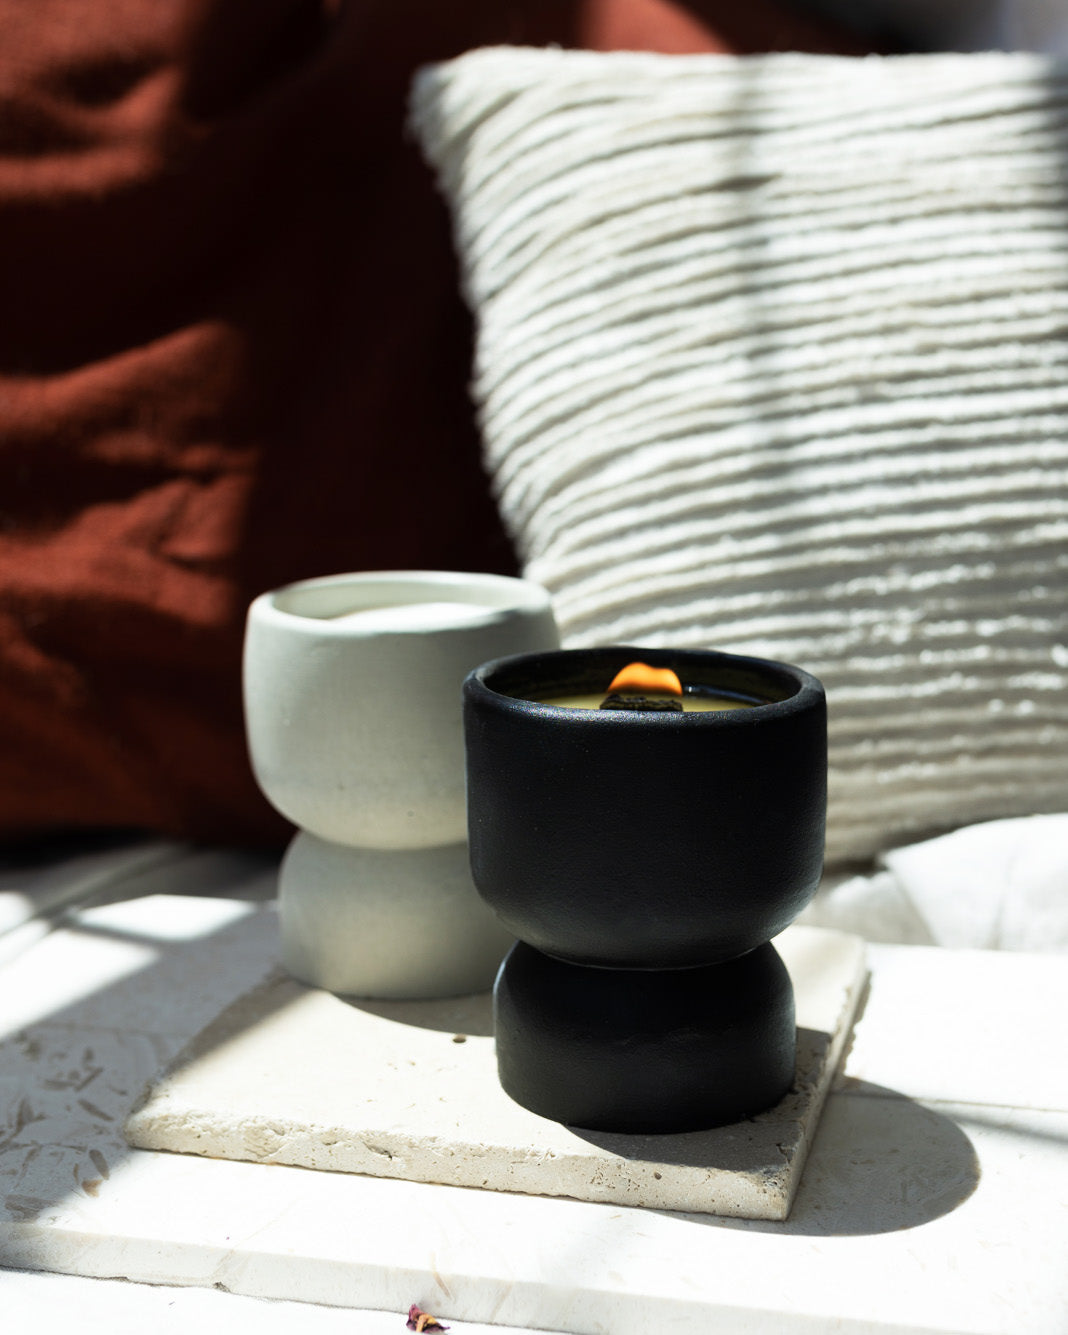 But First Sleep Coconut Soy Candle - Concrete Pedestal